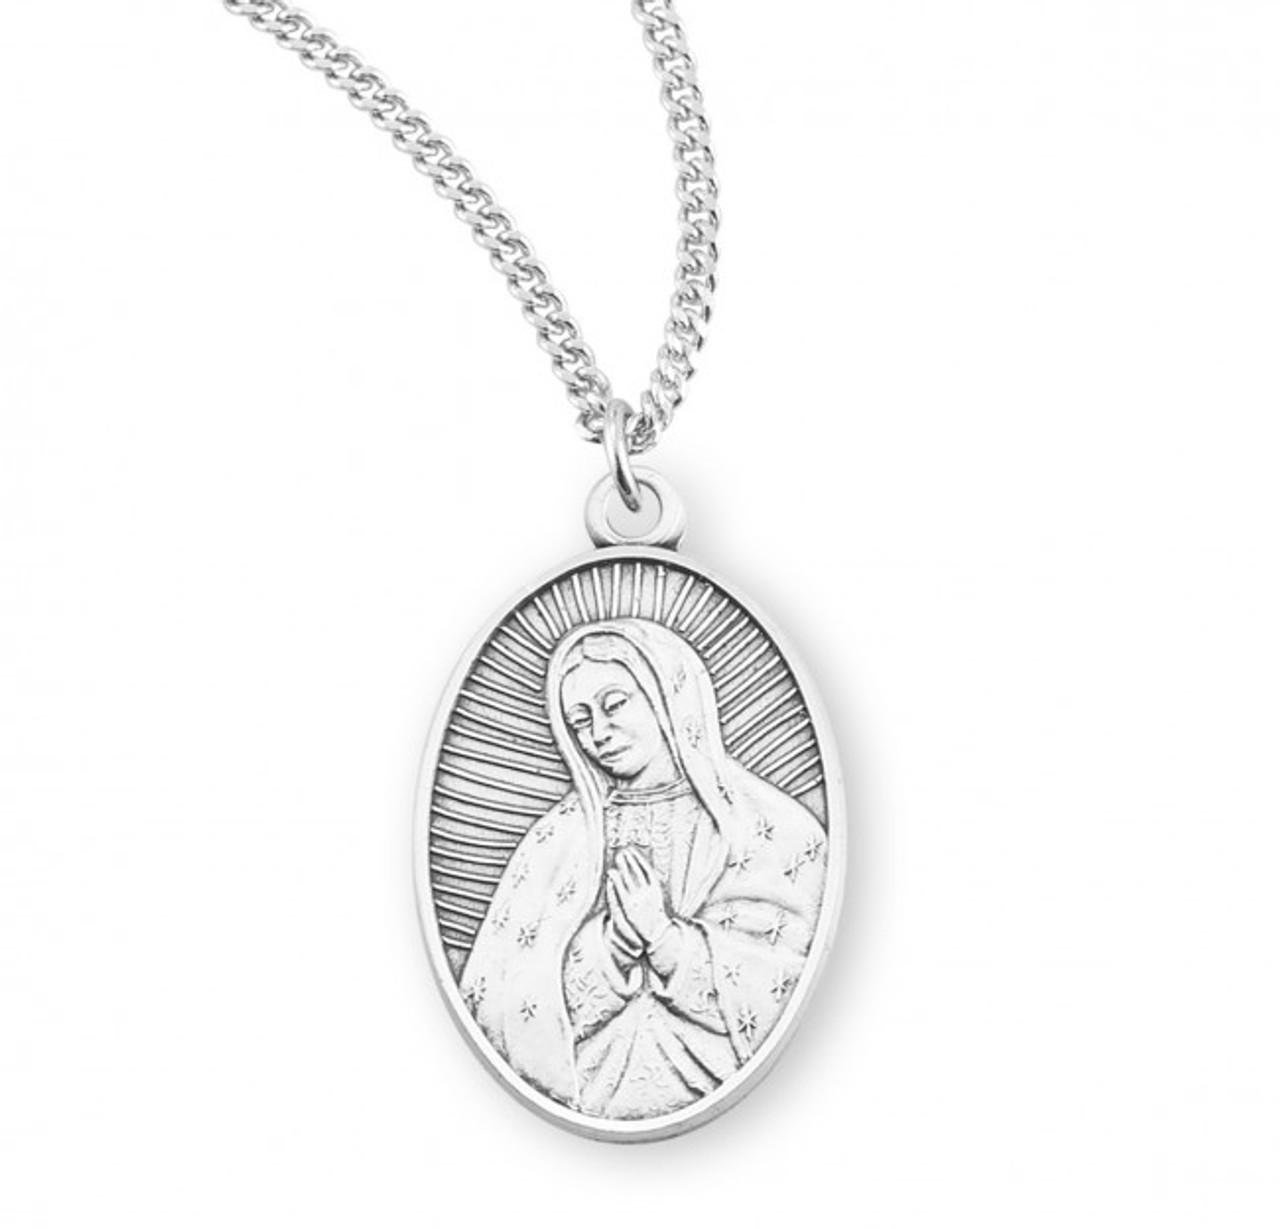 XIXLES Virgin Mary Necklace Sterling Silver Virgin Mary Pendant Necklaces  Virgen De Guadalupe Necklace Mother Saint Mary Necklaces Protection Jewelry  Gifts for Women Girls | Amazon.com